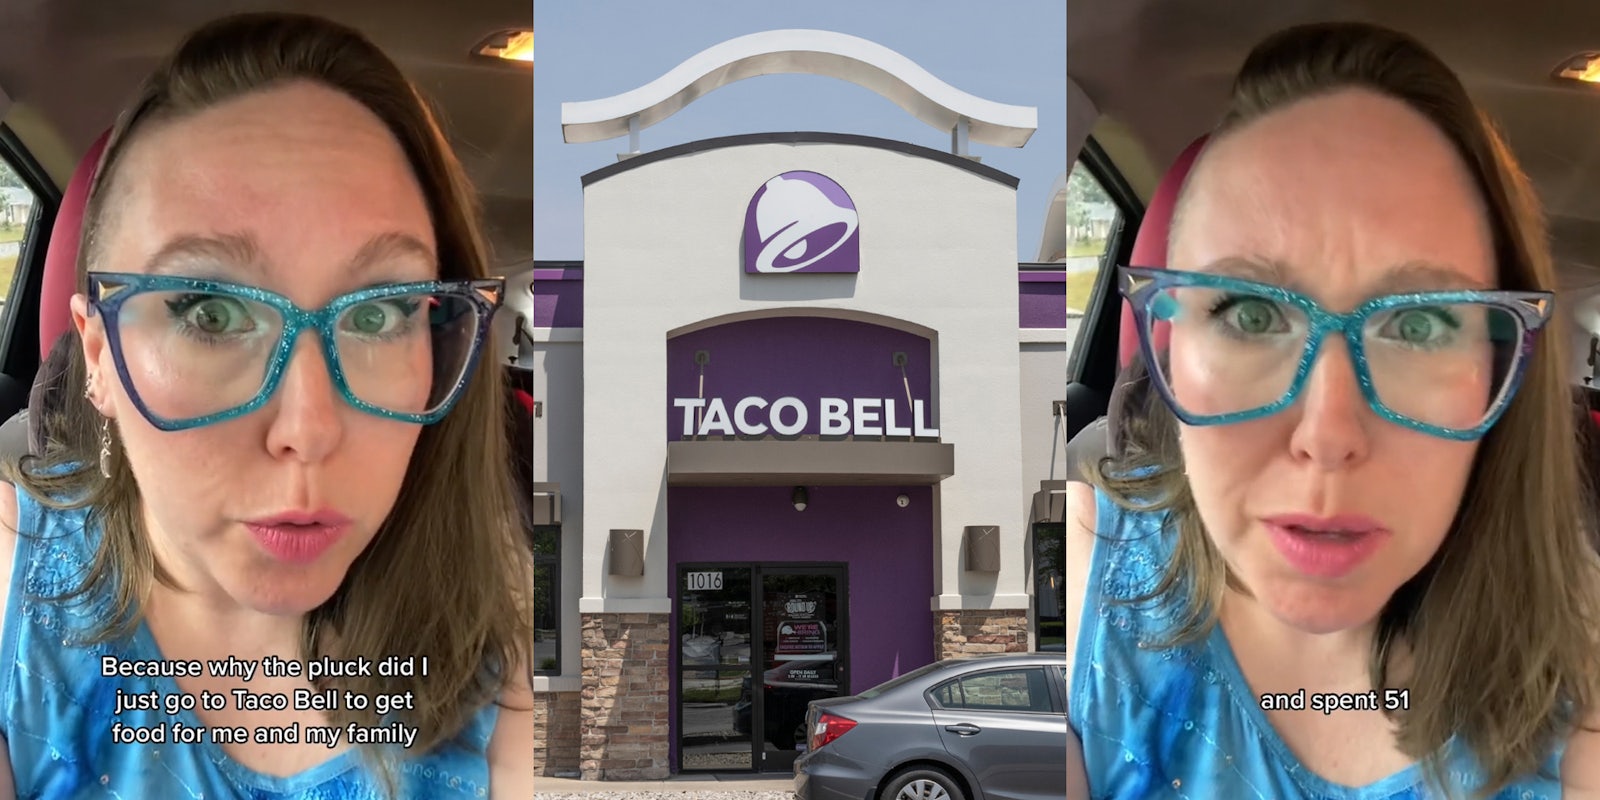 Taco Bell customer speaking in car with caption 'Because why the pluck did I just go to Taco Bell to get food for me and my family' (l) Taco Bell building entrance with sign (c) Taco Bell customer speaking in car with caption 'and spent 51' (r)